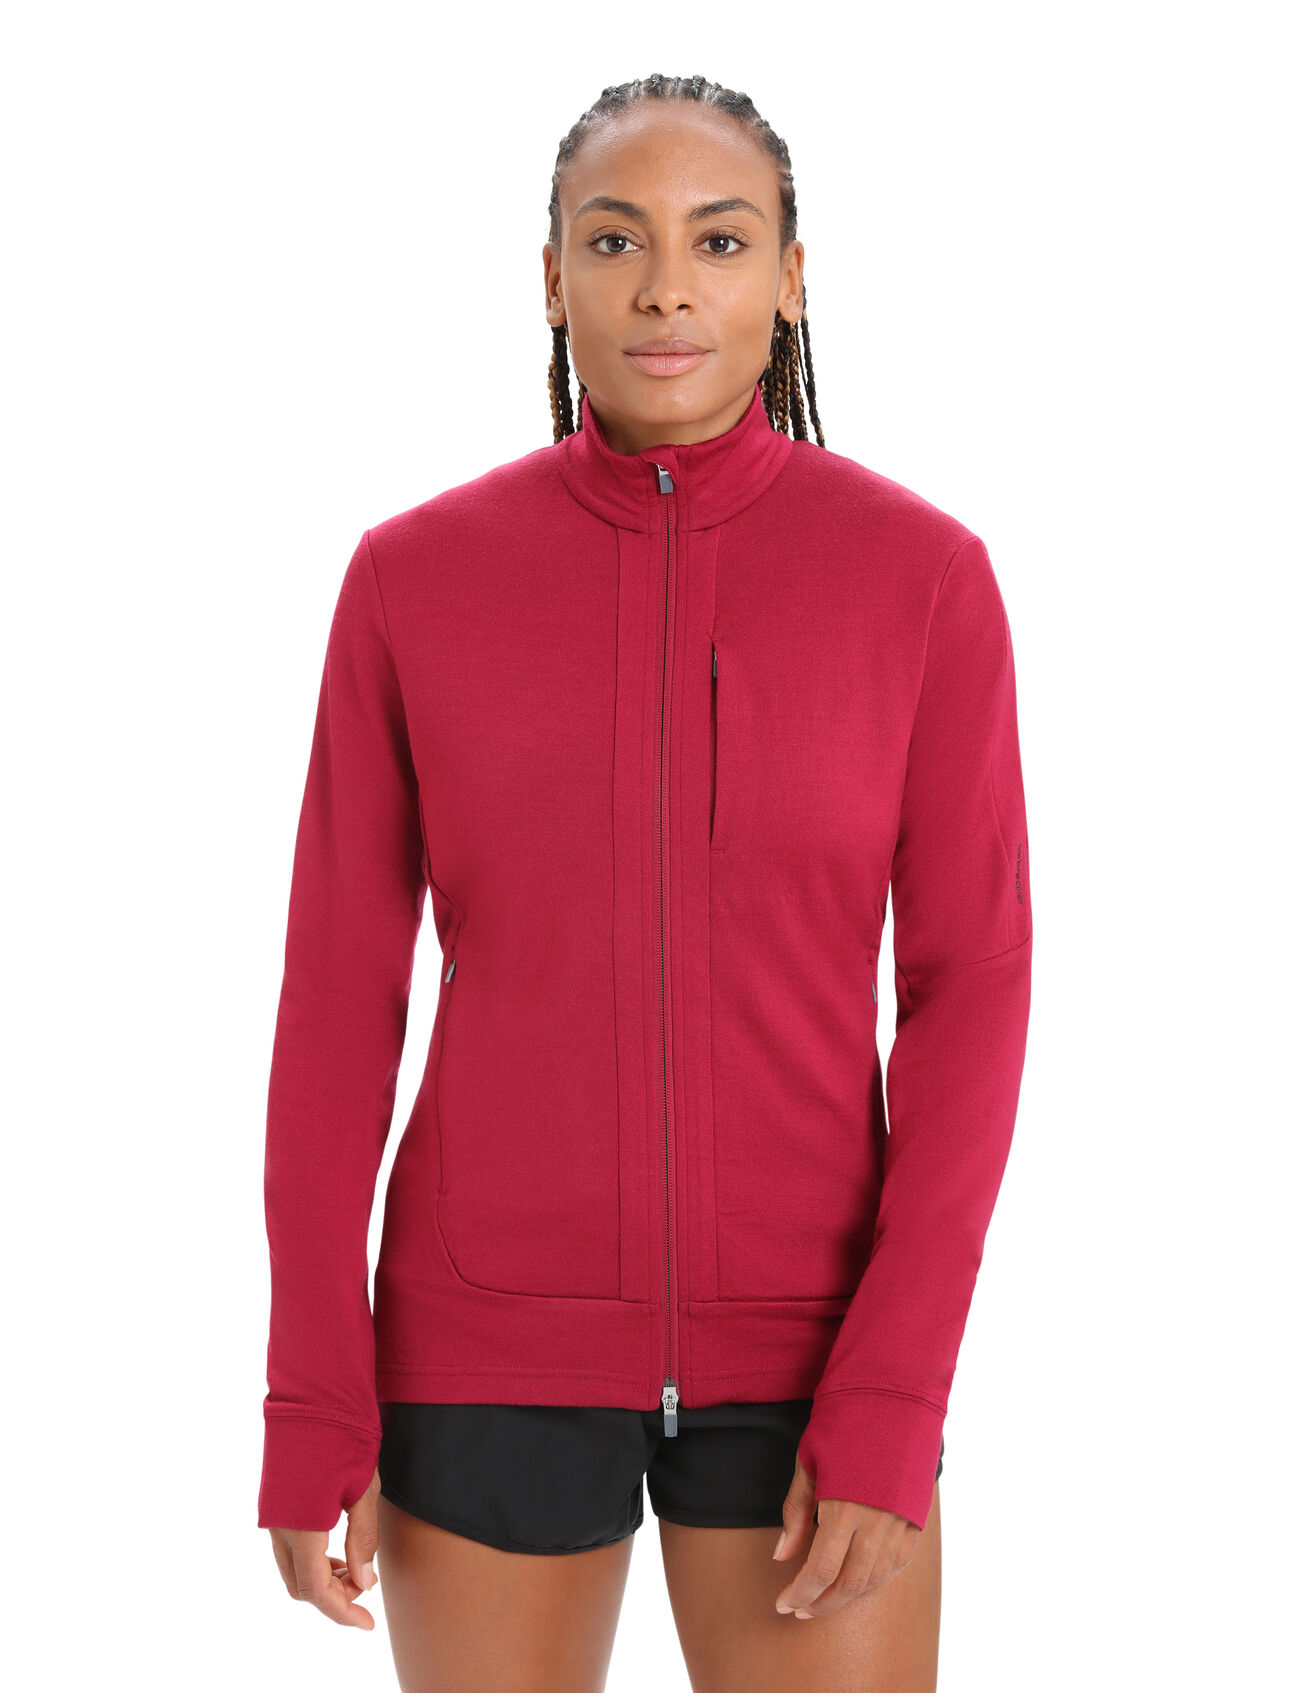 Womens Merino Quantum III Long Sleeve Zip Jacket A 100% merino wool mid layer ideal for technical mountain adventures, the Quantum III Long Sleeve Zip helps regulate your body temperature when you're on the move.